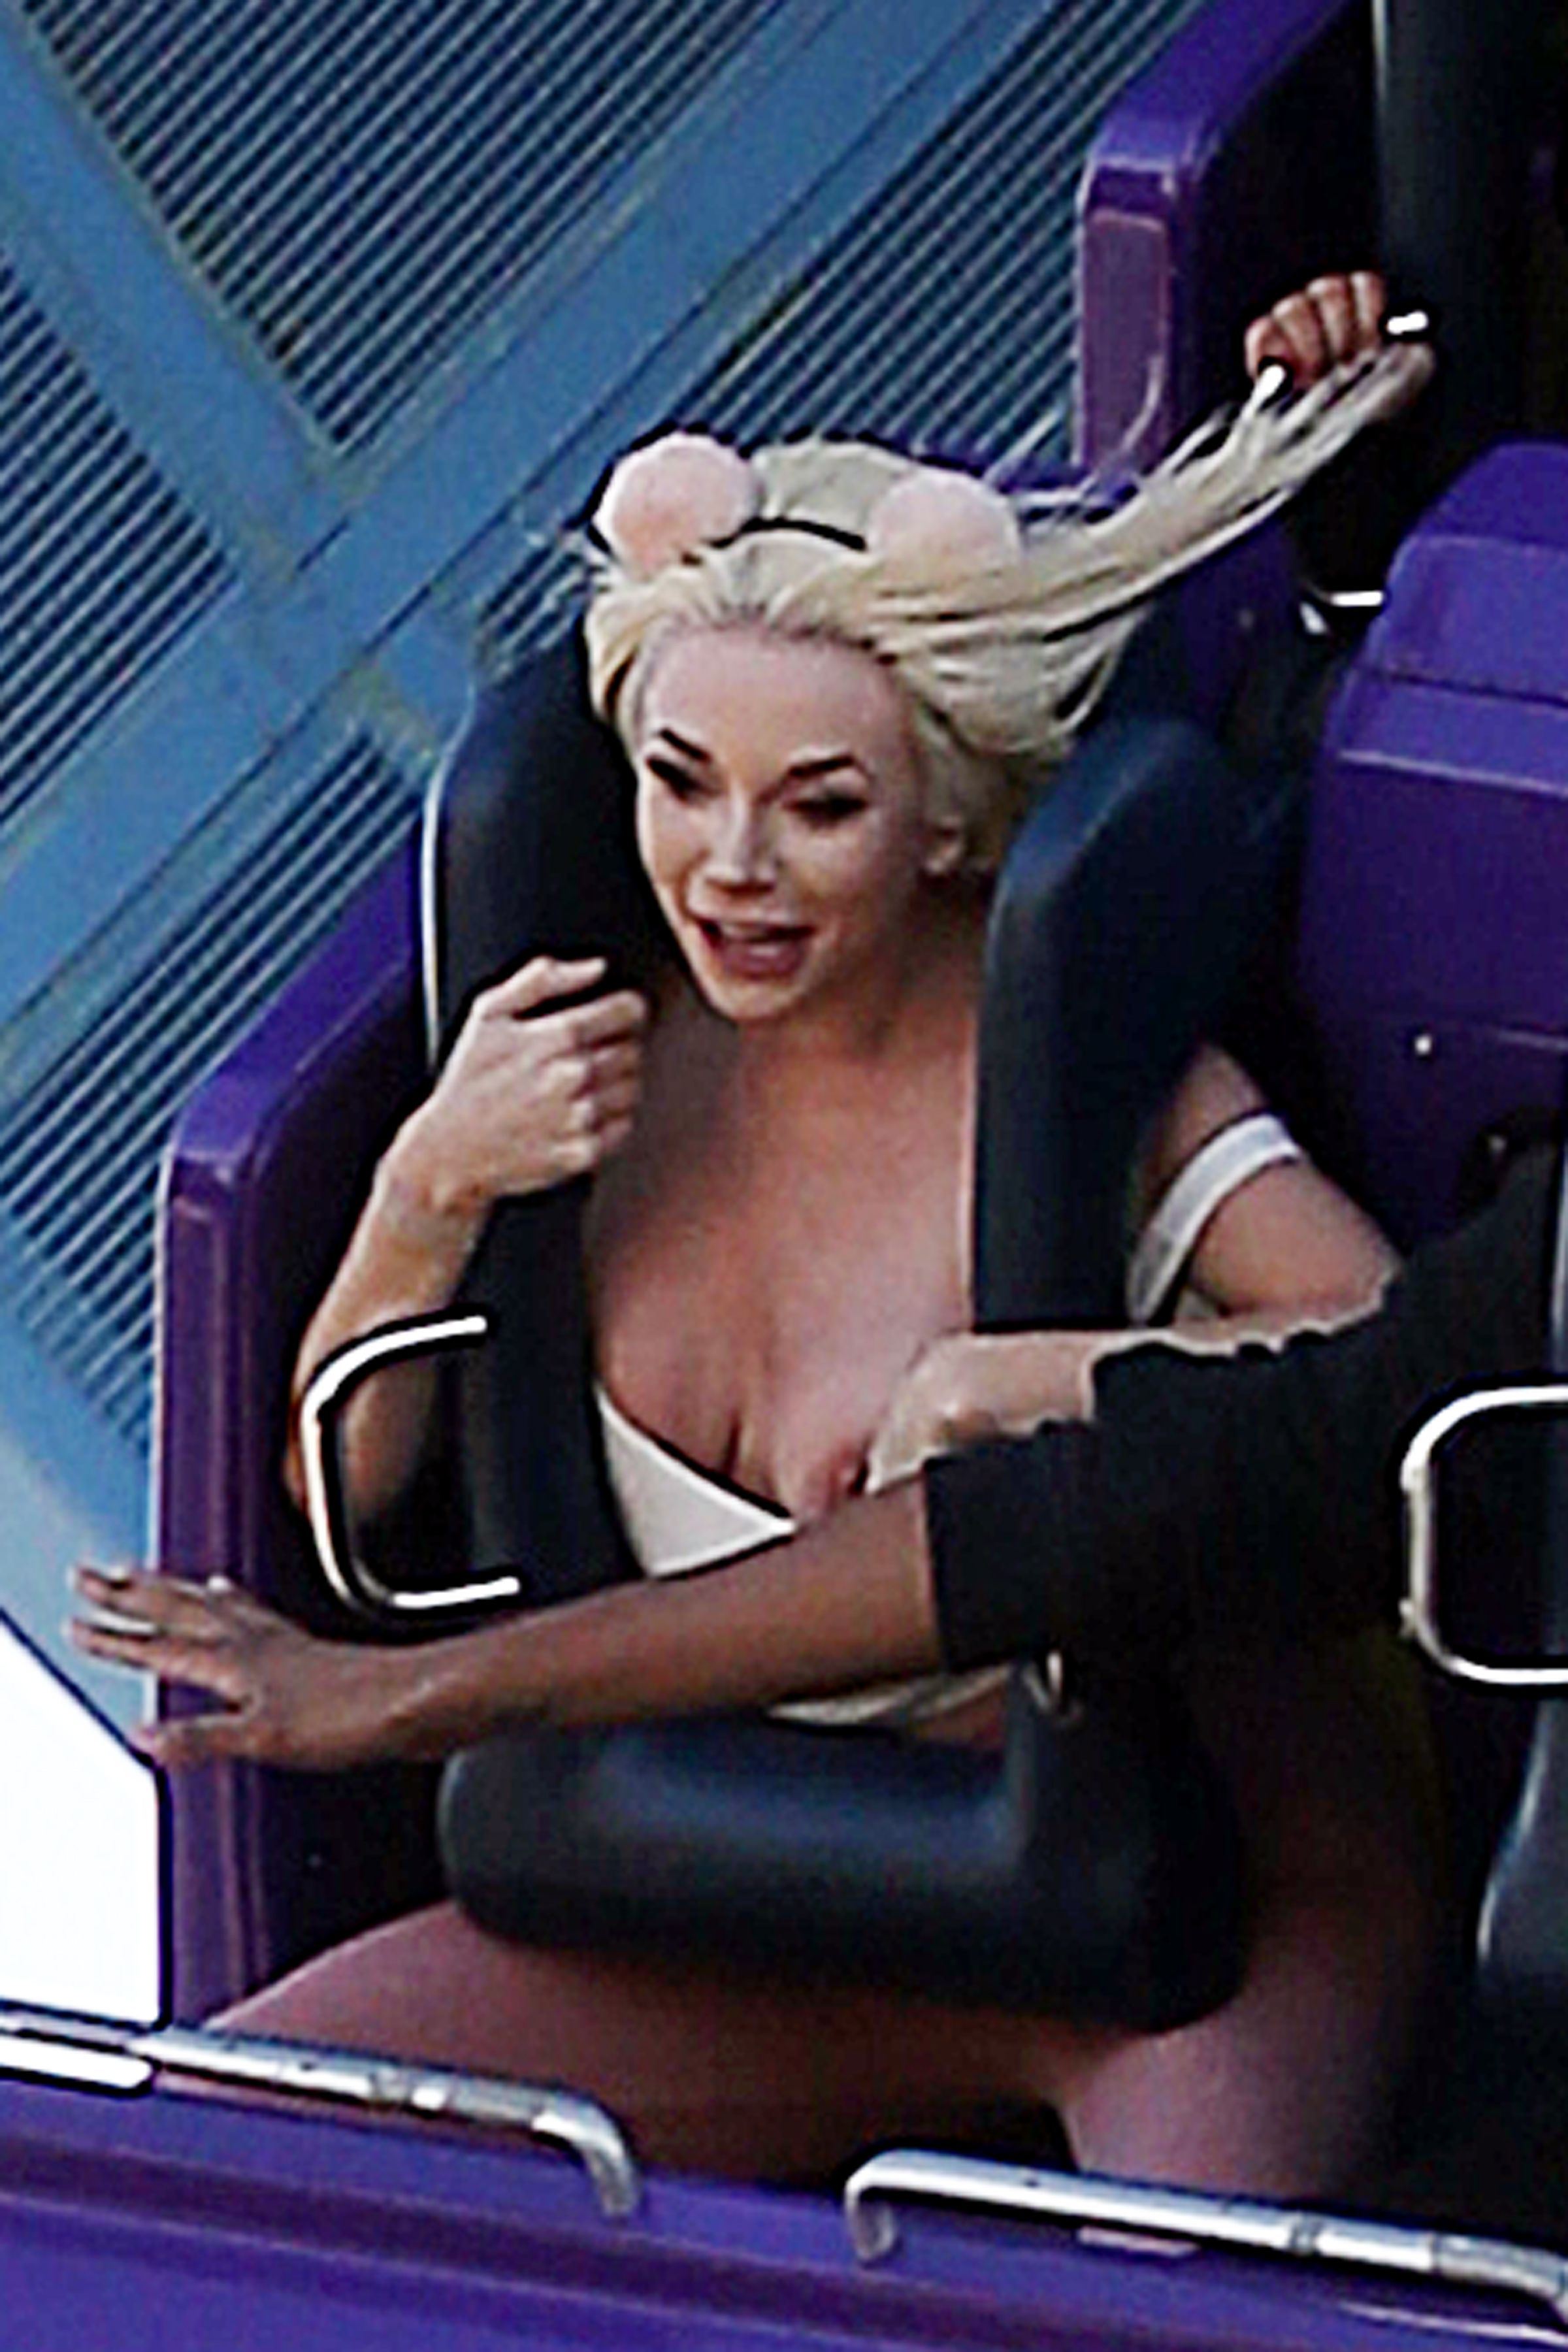 Courtney Stodden’s Boobs Falling Out